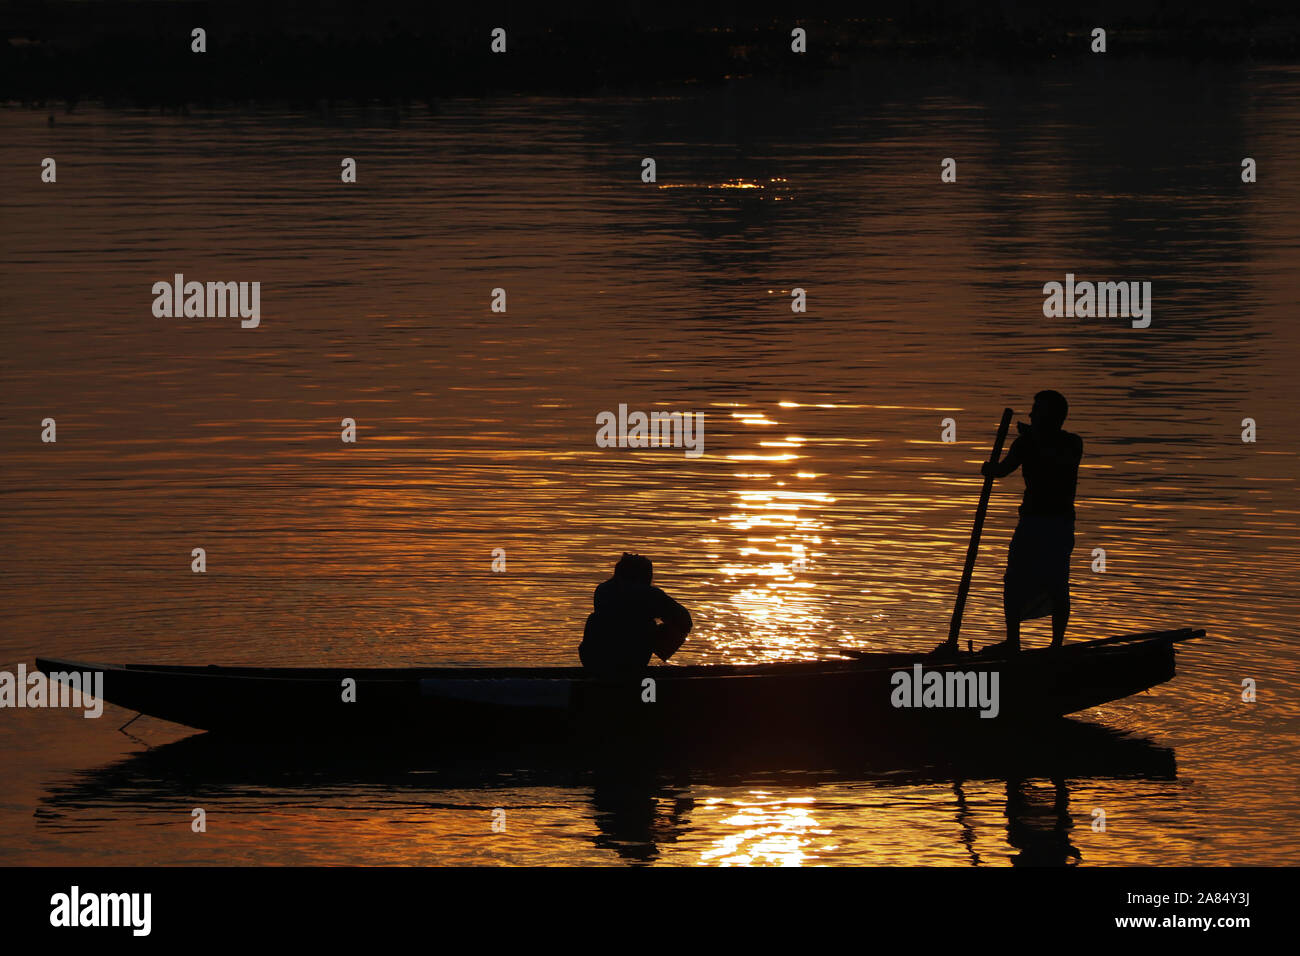 Catching fish 01nov2019 Catching fish in the winter morning image from bangladesh, Asia .Nazmul Islam/alamy live news Stock Photo